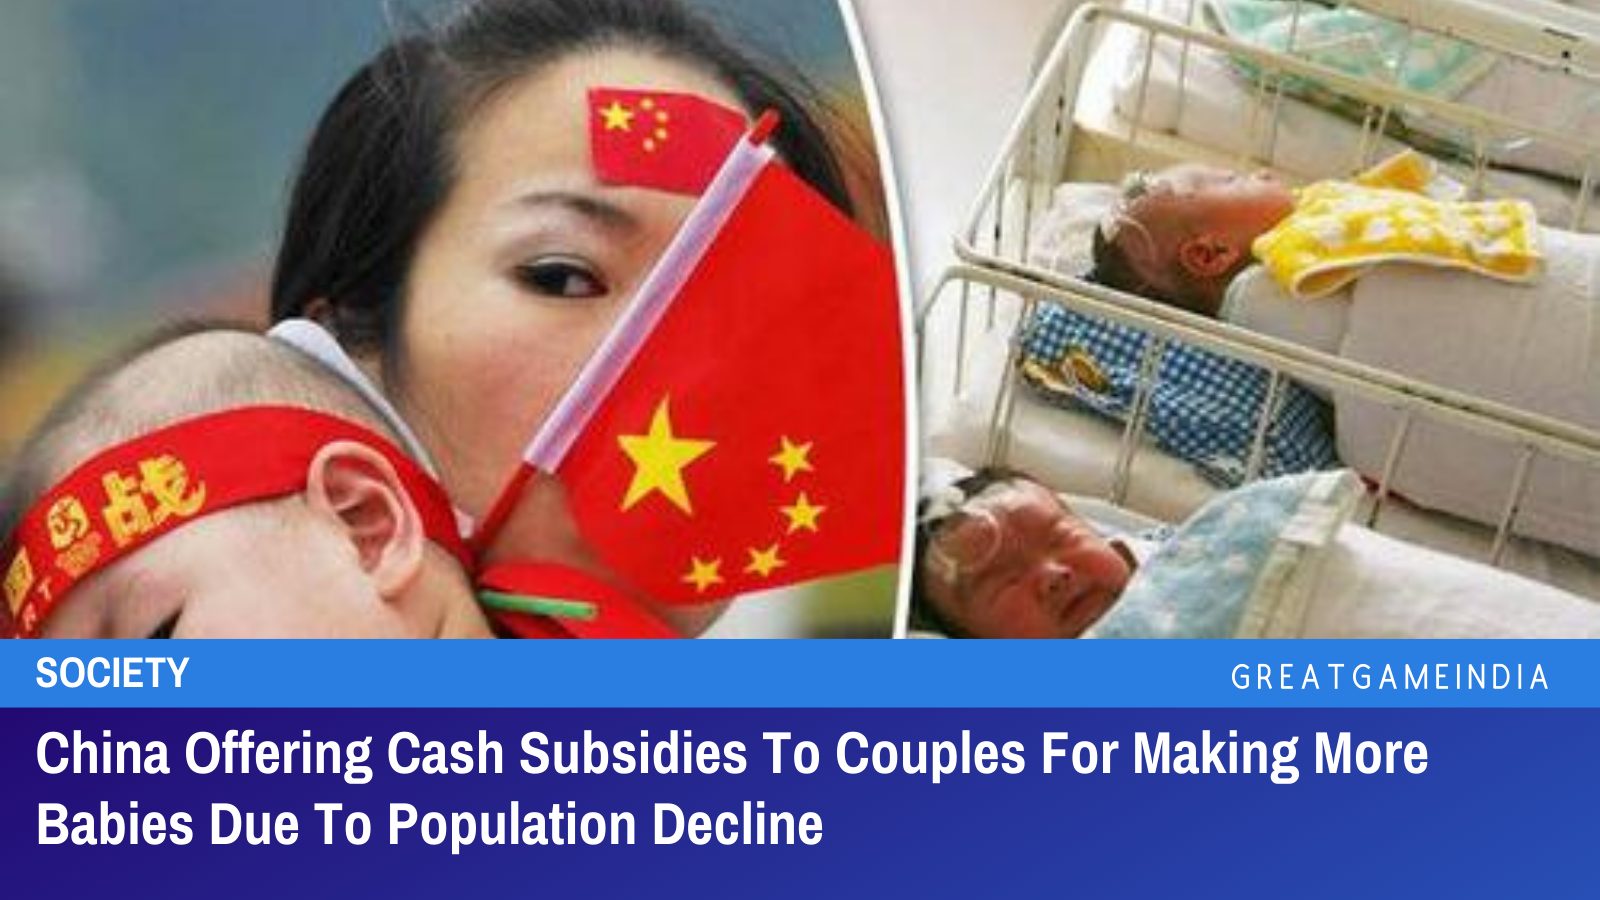 China Offering Cash Subsidies To Couples For Making More Babies Due To Population Decline